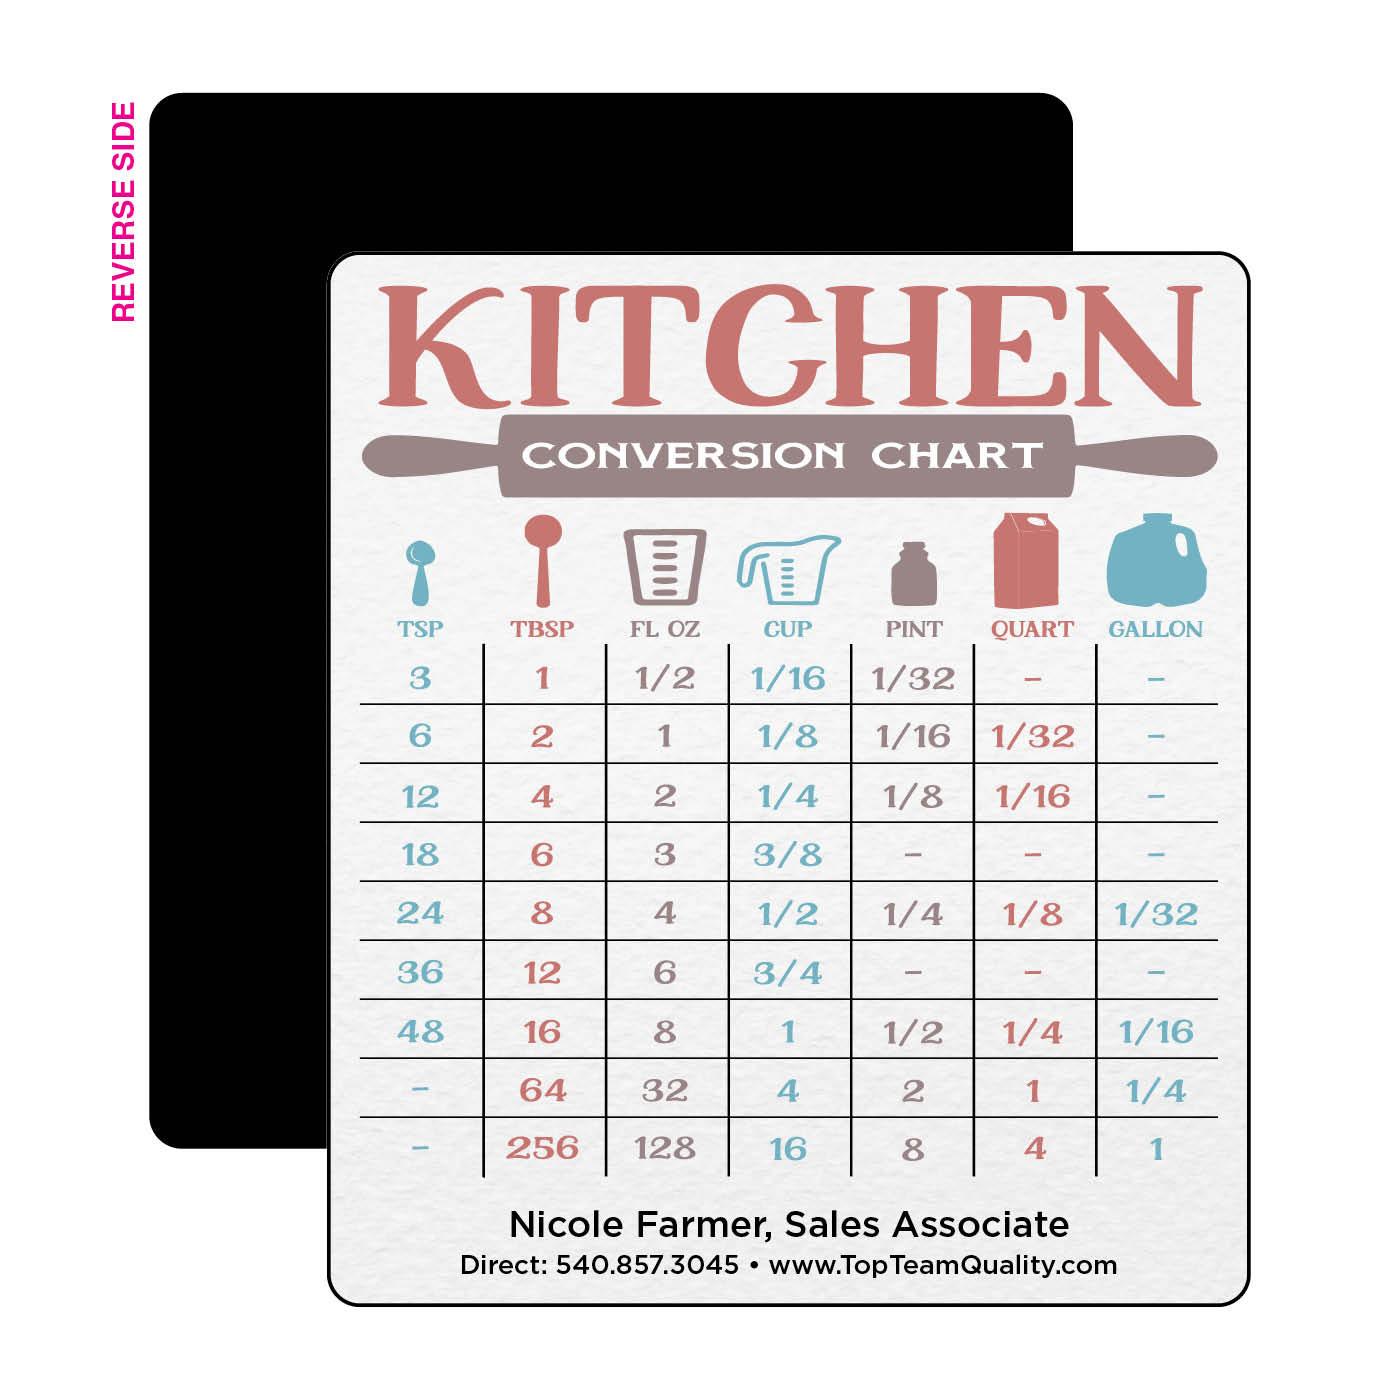 printed-magnets-household-reference-magnets-kitchen-conversions